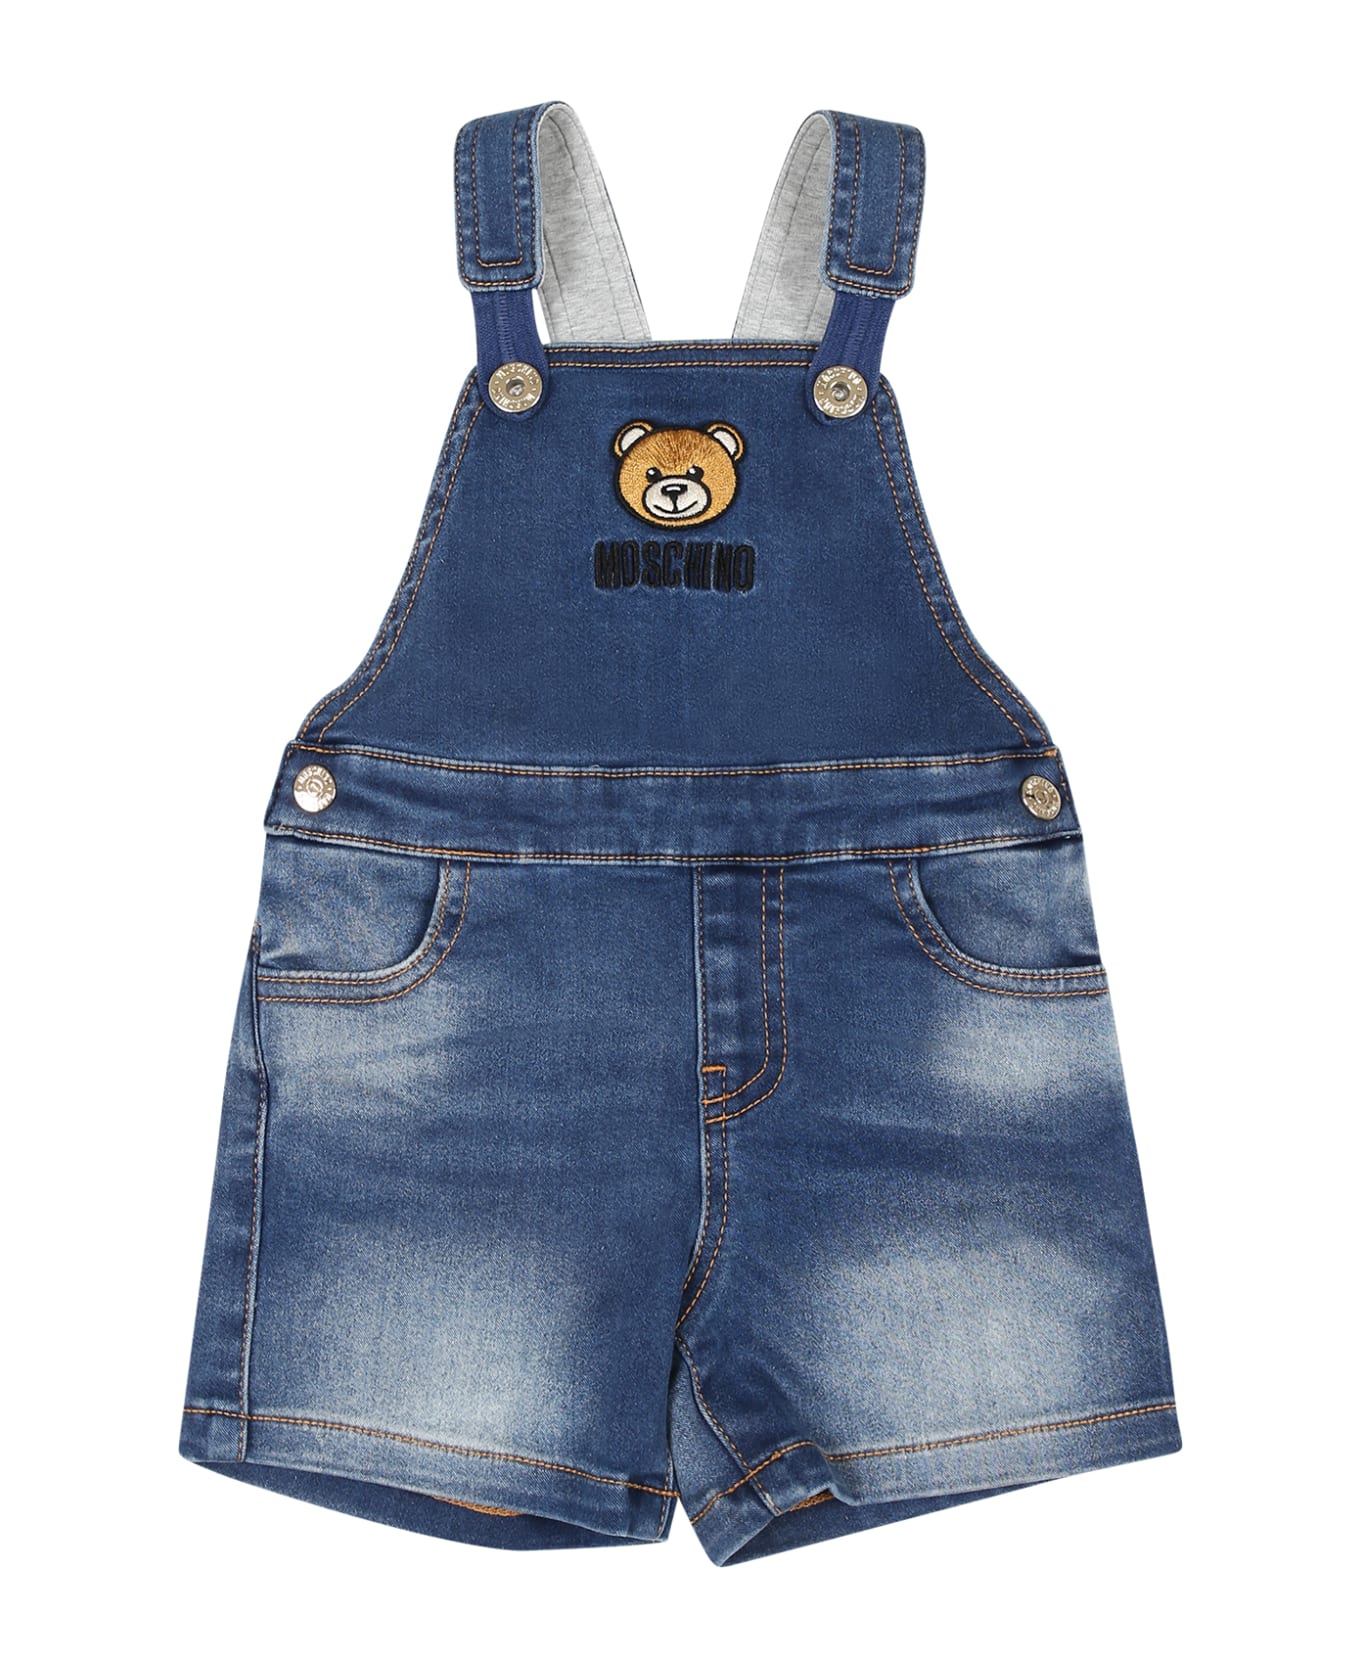 Moschino Blue Dungarees For Babykids With Teddy Bear And Logo - Denim